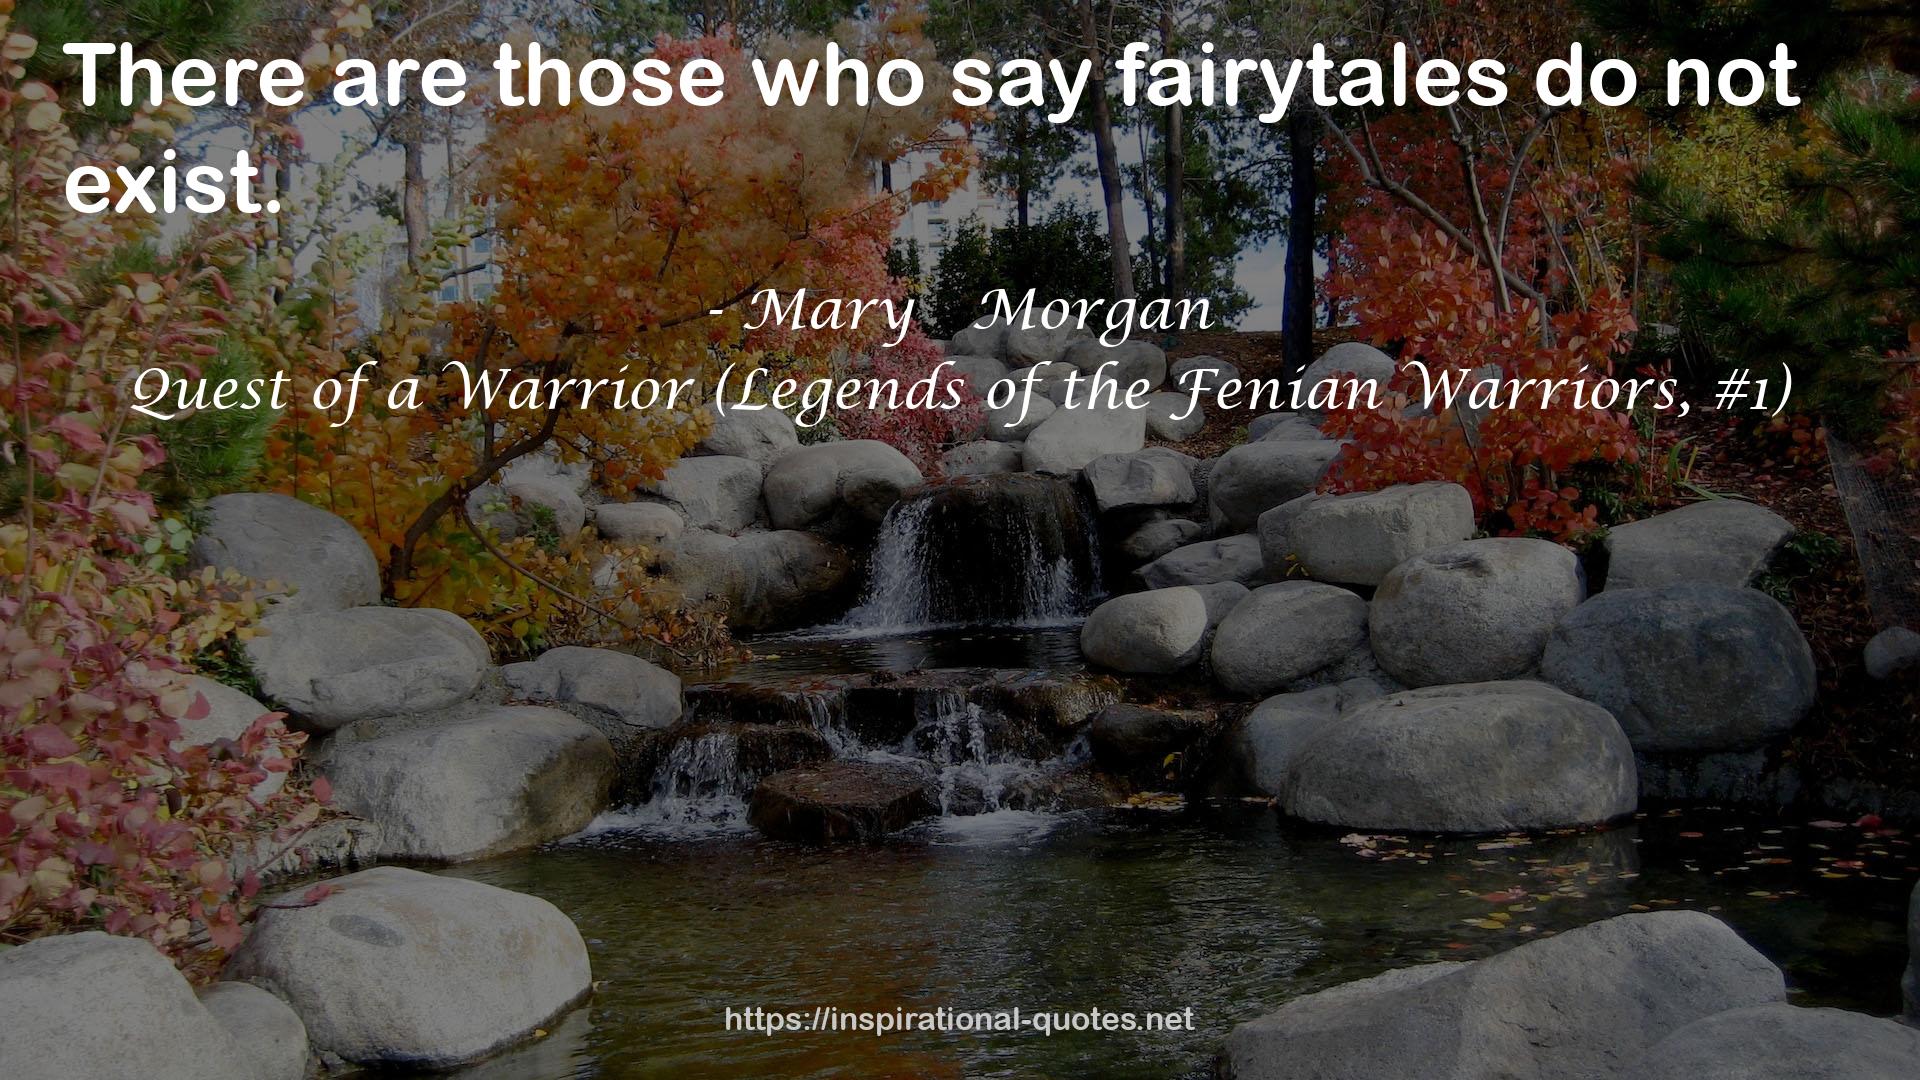 Quest of a Warrior (Legends of the Fenian Warriors, #1) QUOTES